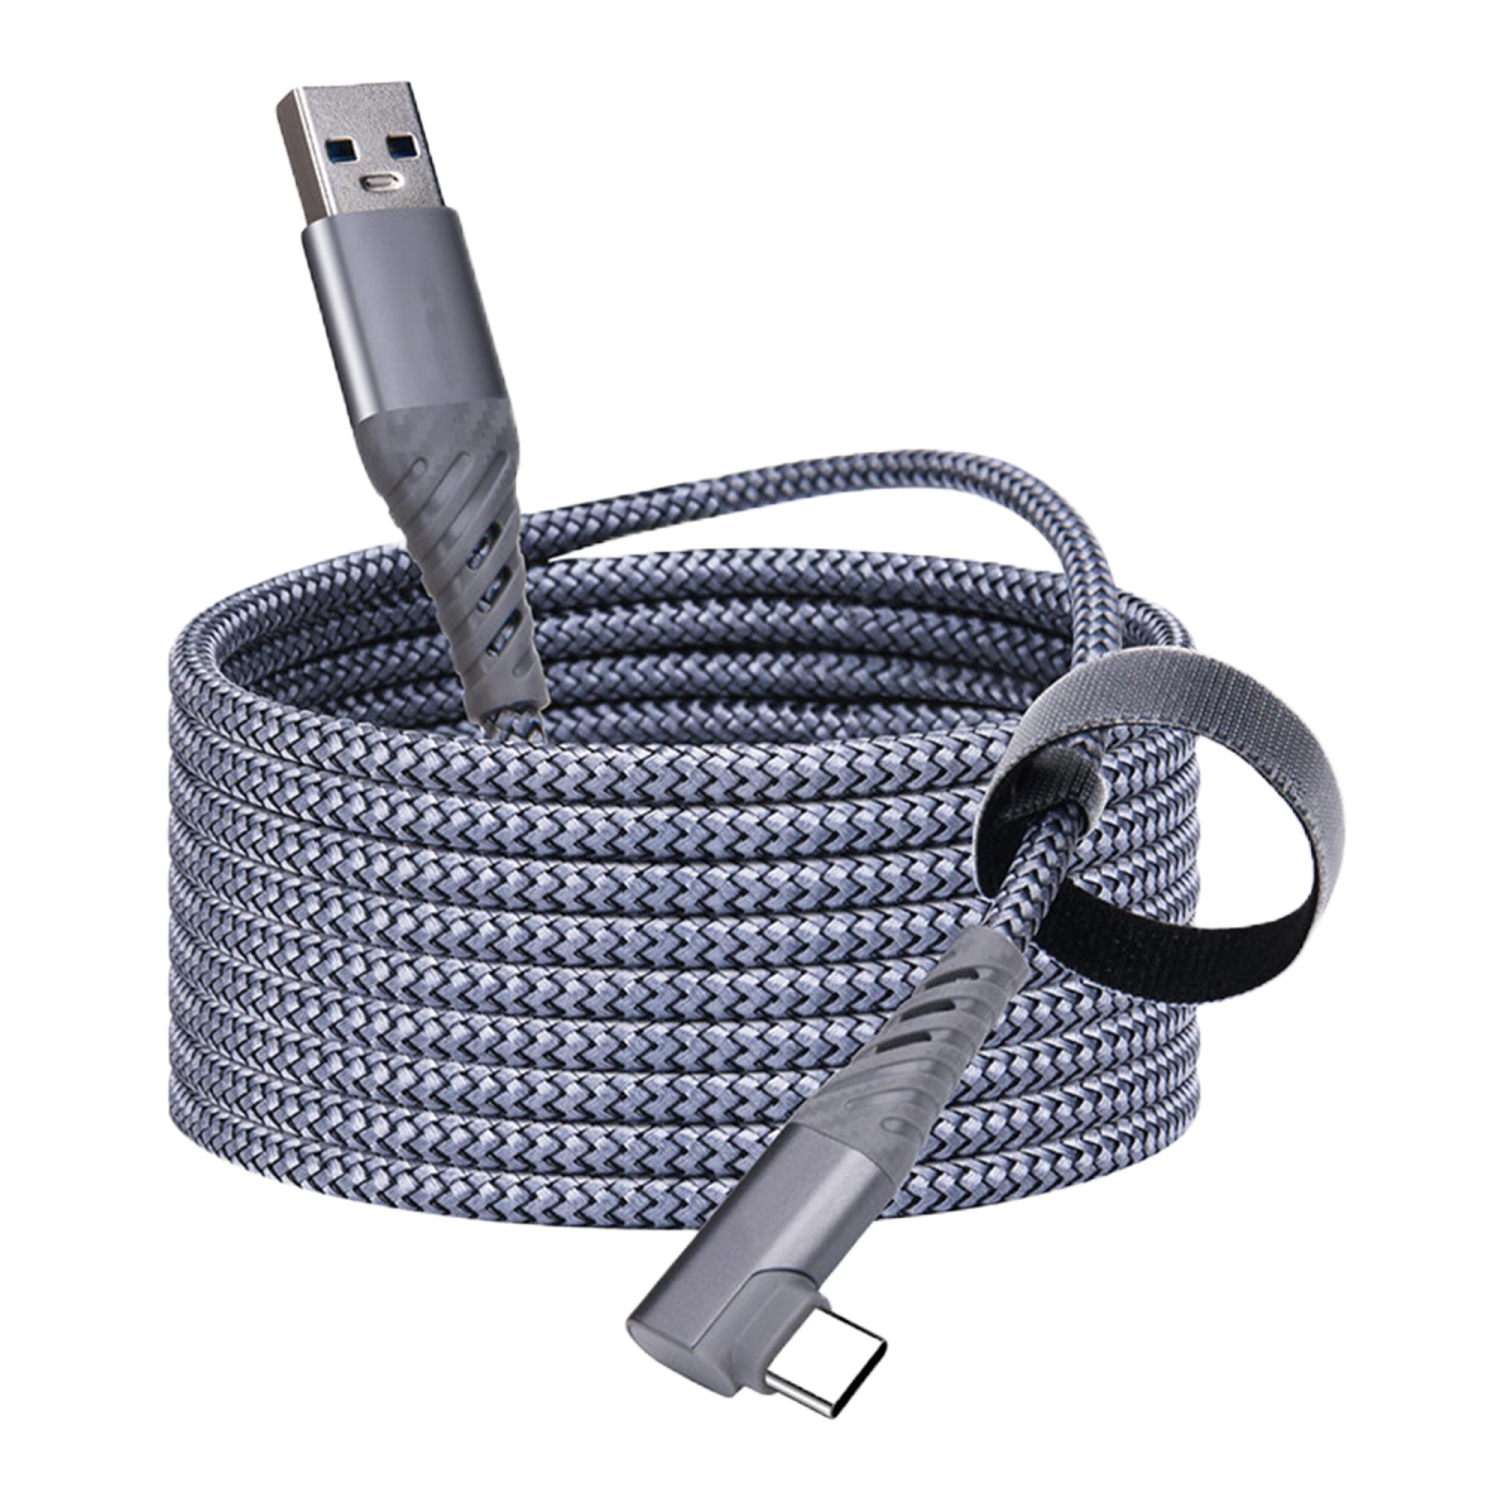 16ft(5m) Link Cable for Oculus Quest 2/1, USB 3.0 to USB C Cable, 90Degree Braided Fast Charging & 5Gbps Data Transfer VR Headset/PC/LG/Samsung Galaxy